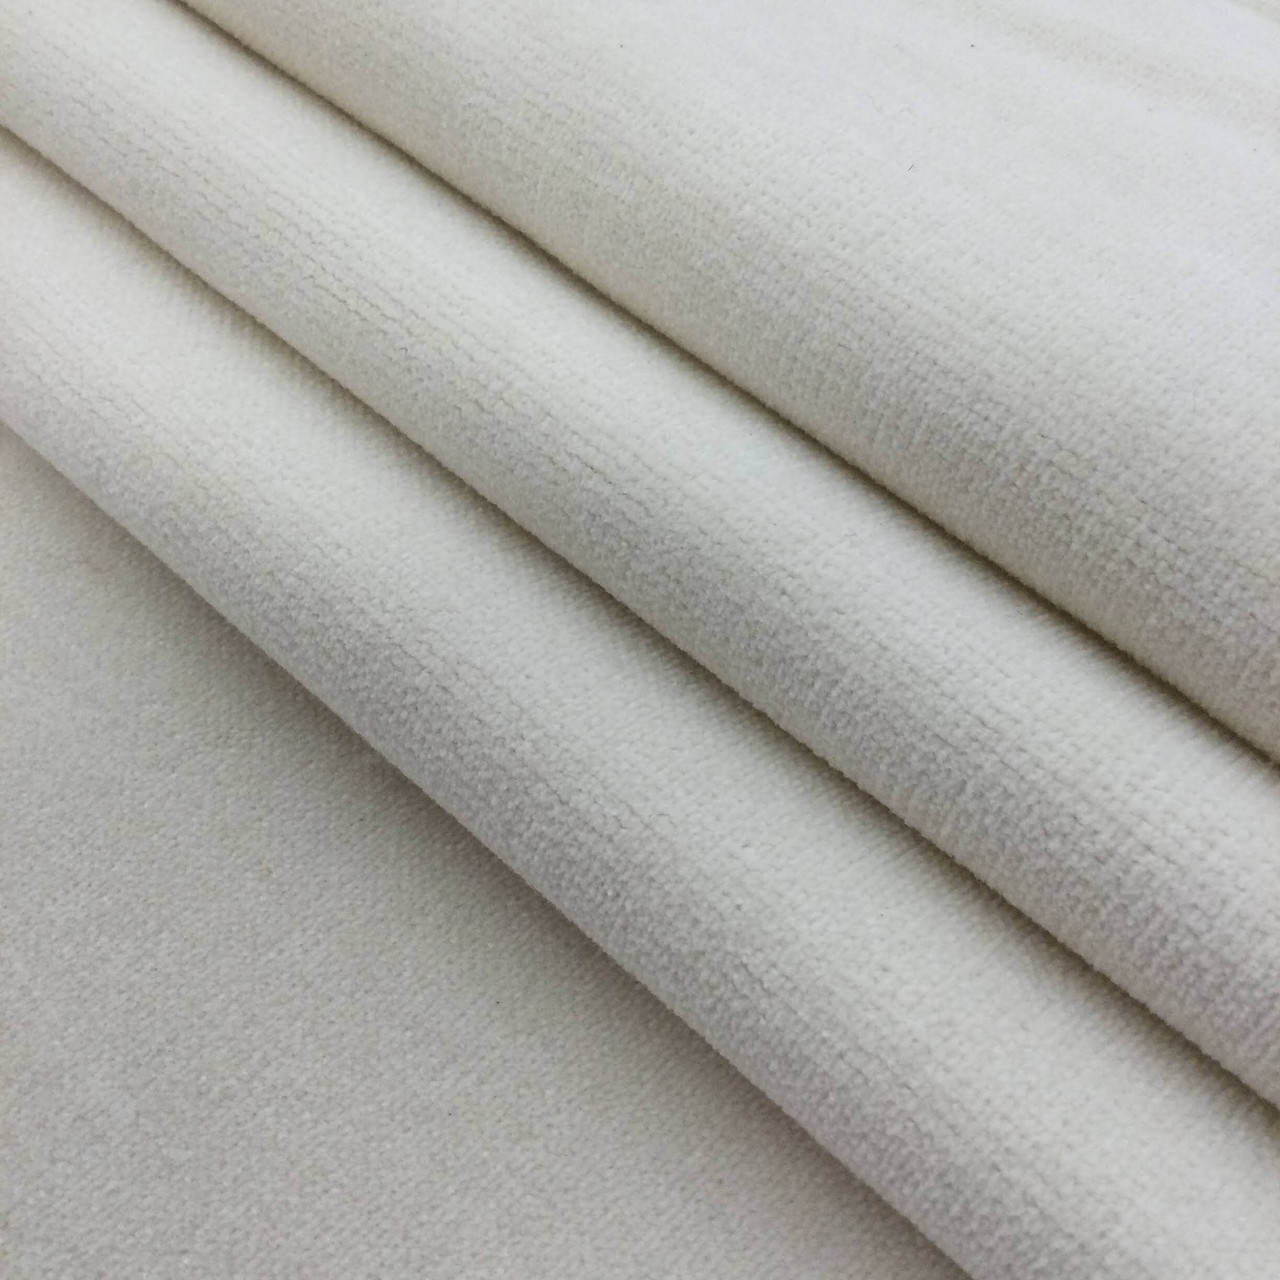 Off White Poly Wool Soft Light Weight Fabric 60 Wide. Suitable for